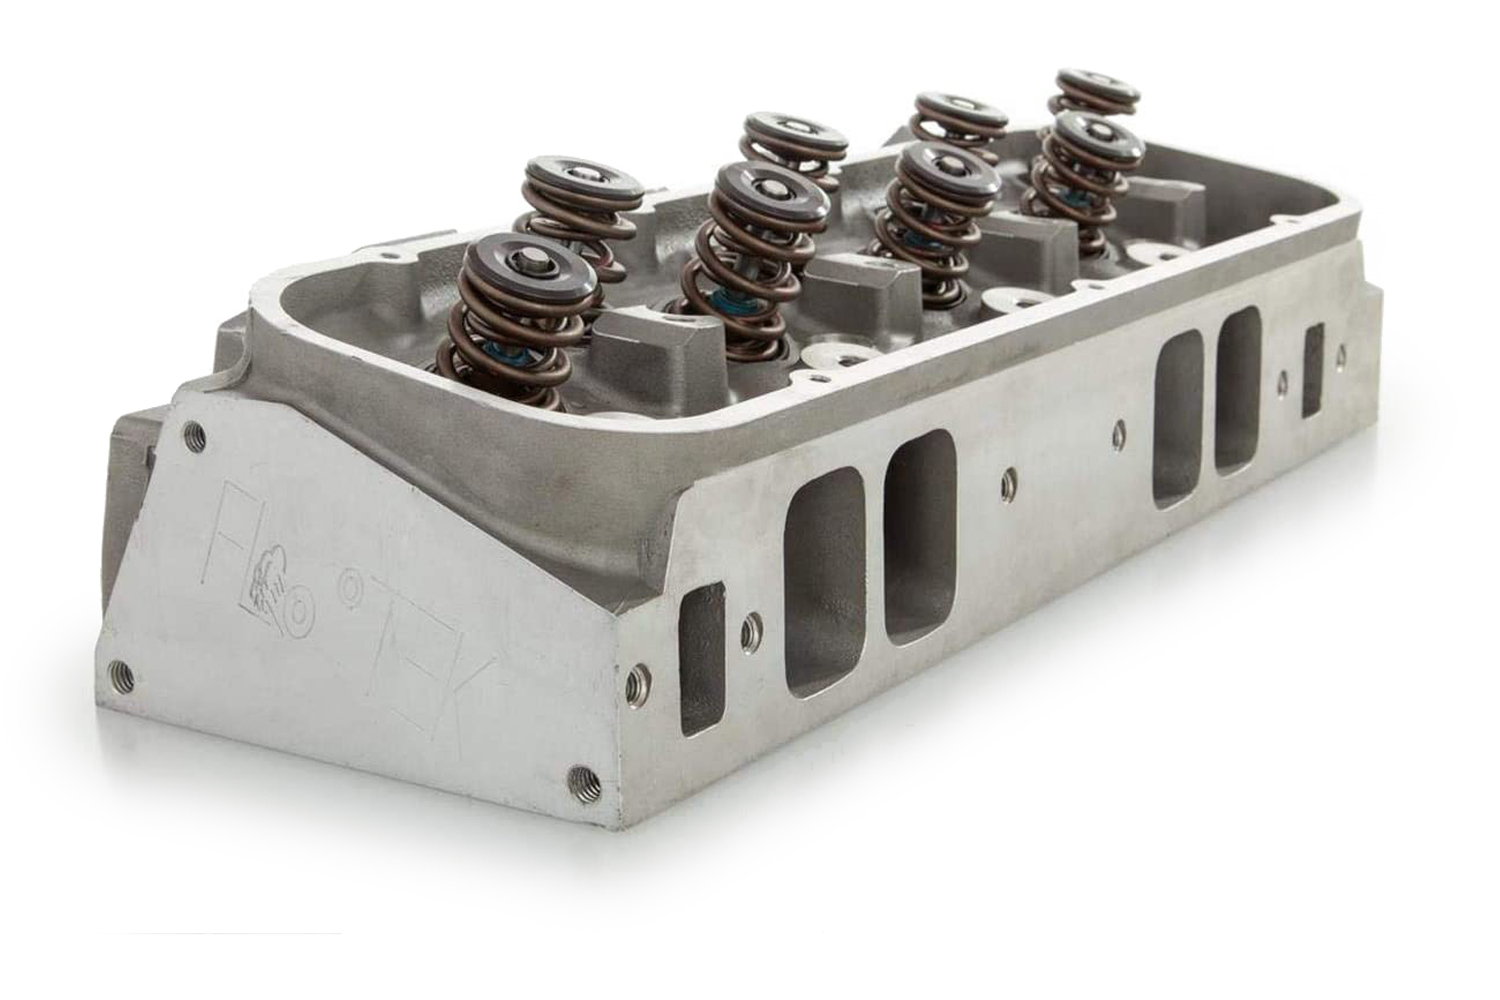 Flo Tek 305-600 Cylinder Head, Assembled, 2.250 / 1.880 in Valves, 320 cc Intake, 133 cc Chamber, 1.530 in Springs, Aluminum, Big Block Chevy, Each